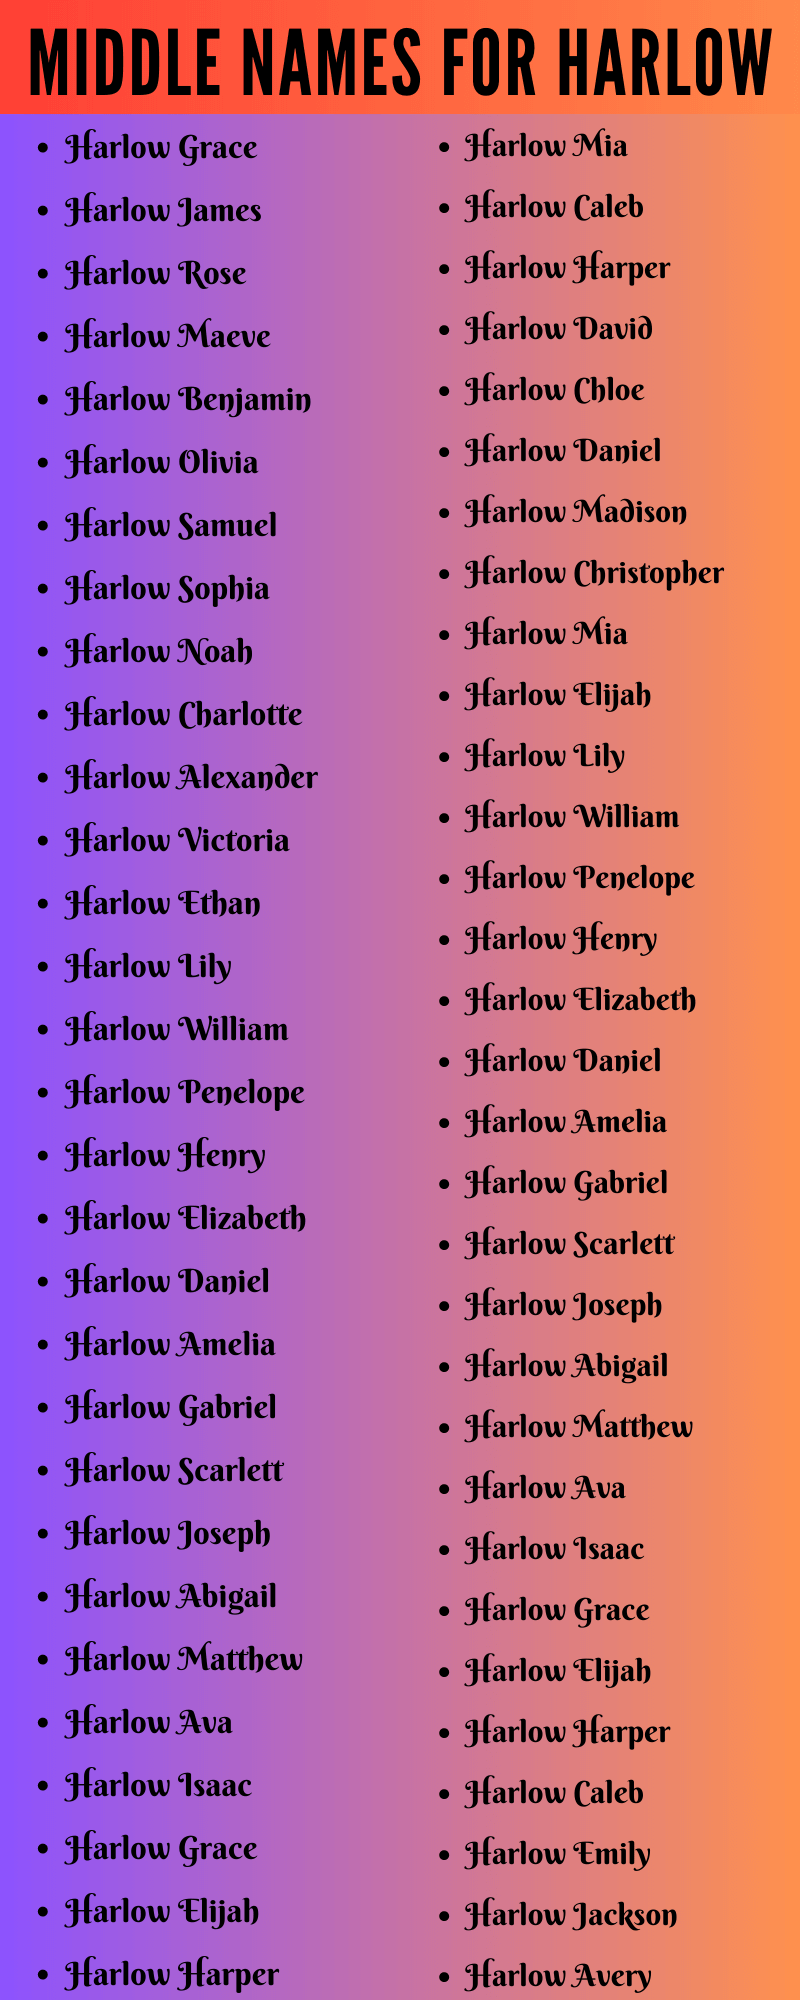 Harlow Middle Names